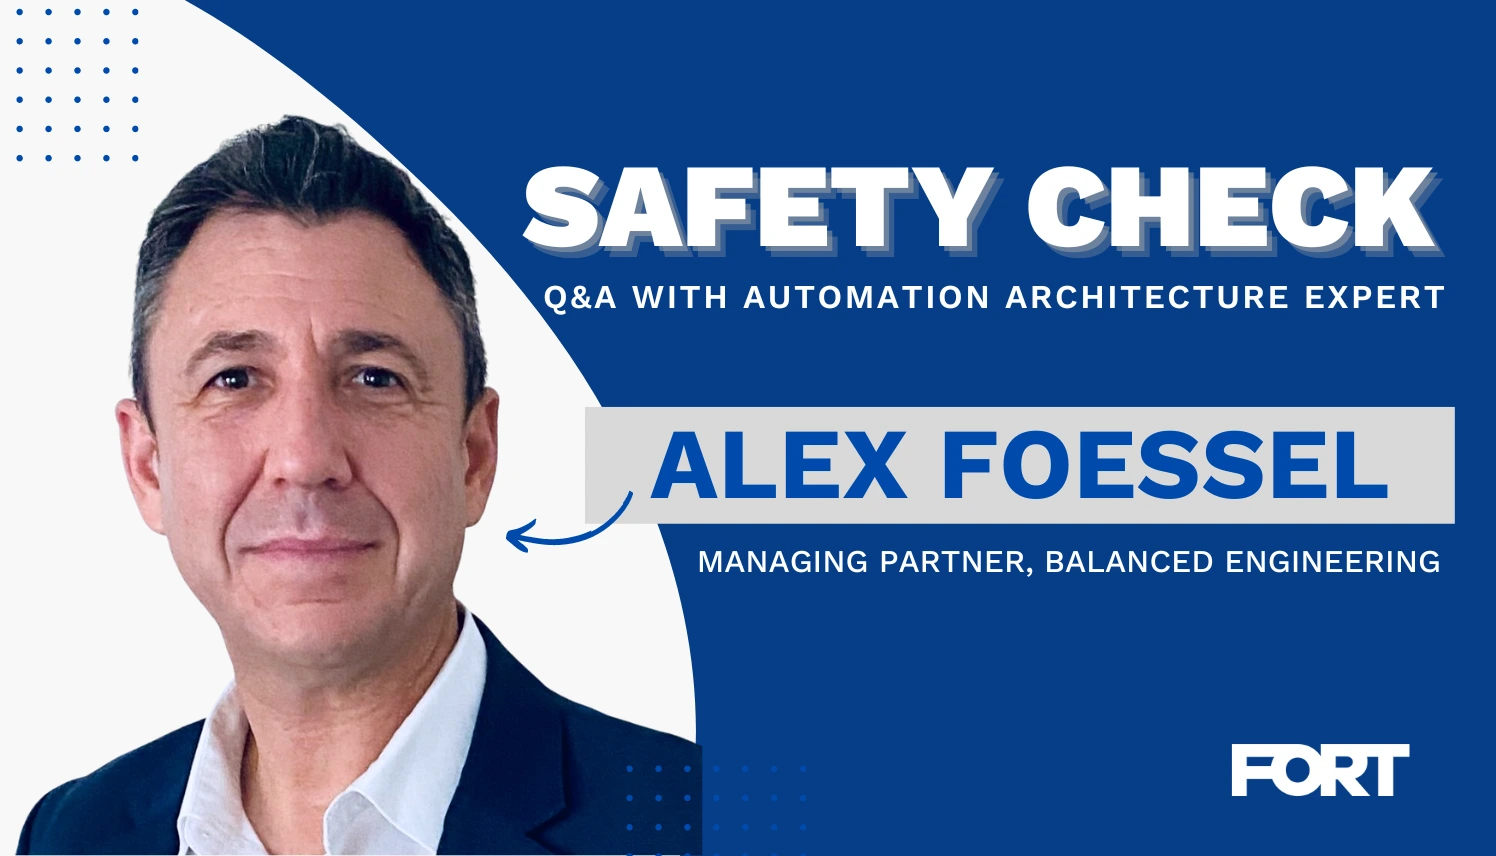 Off-Highway Automation System Safety with Balanced Engineering